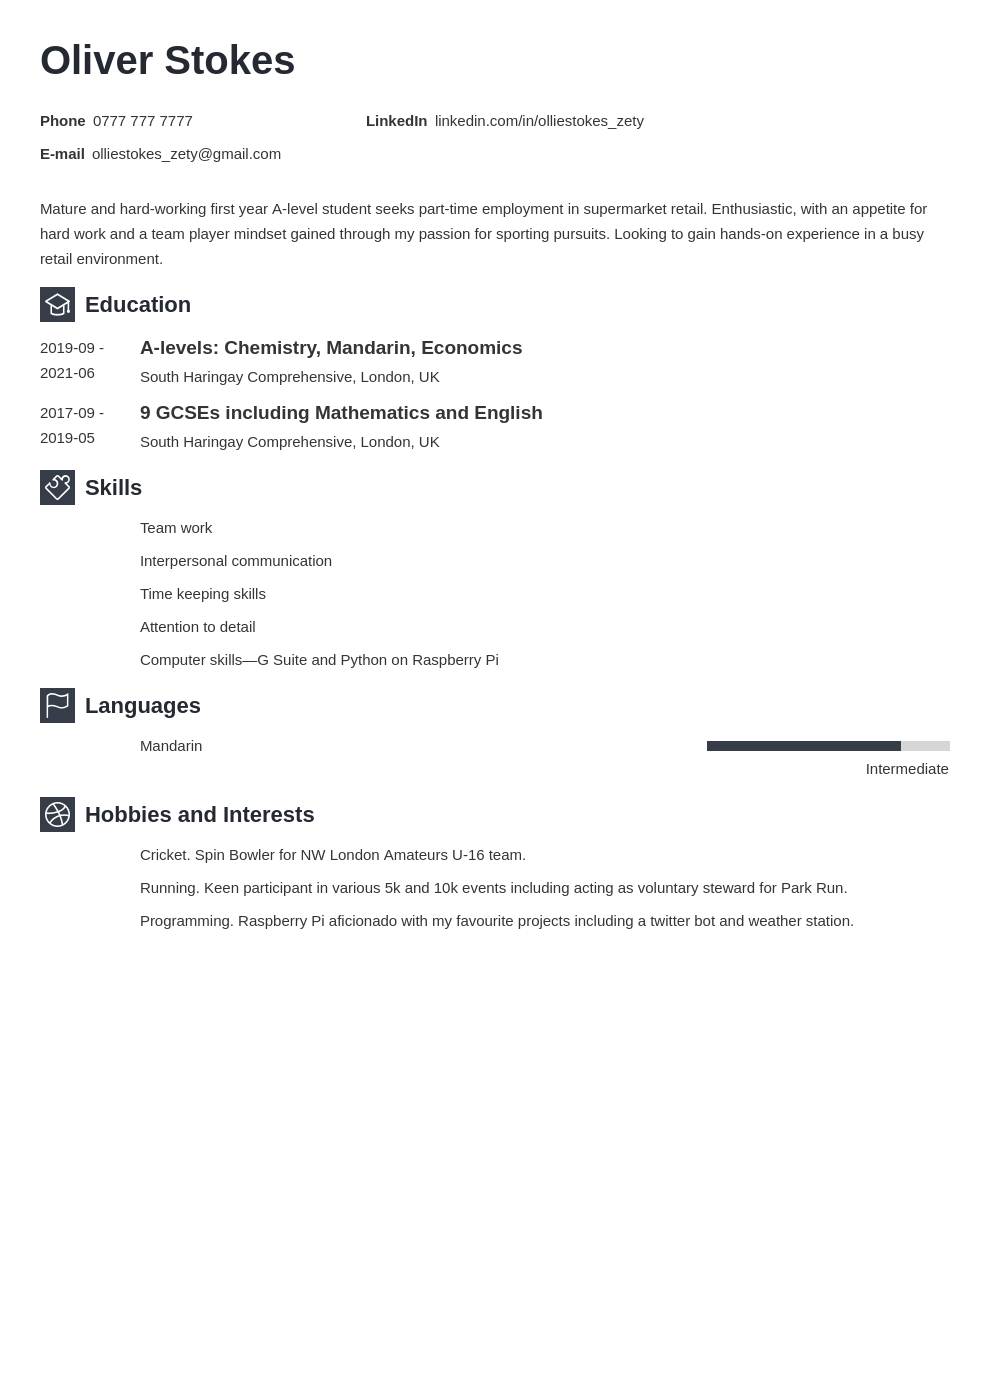 How to Write a CV for a 30-Year-Old [Template for First CV]